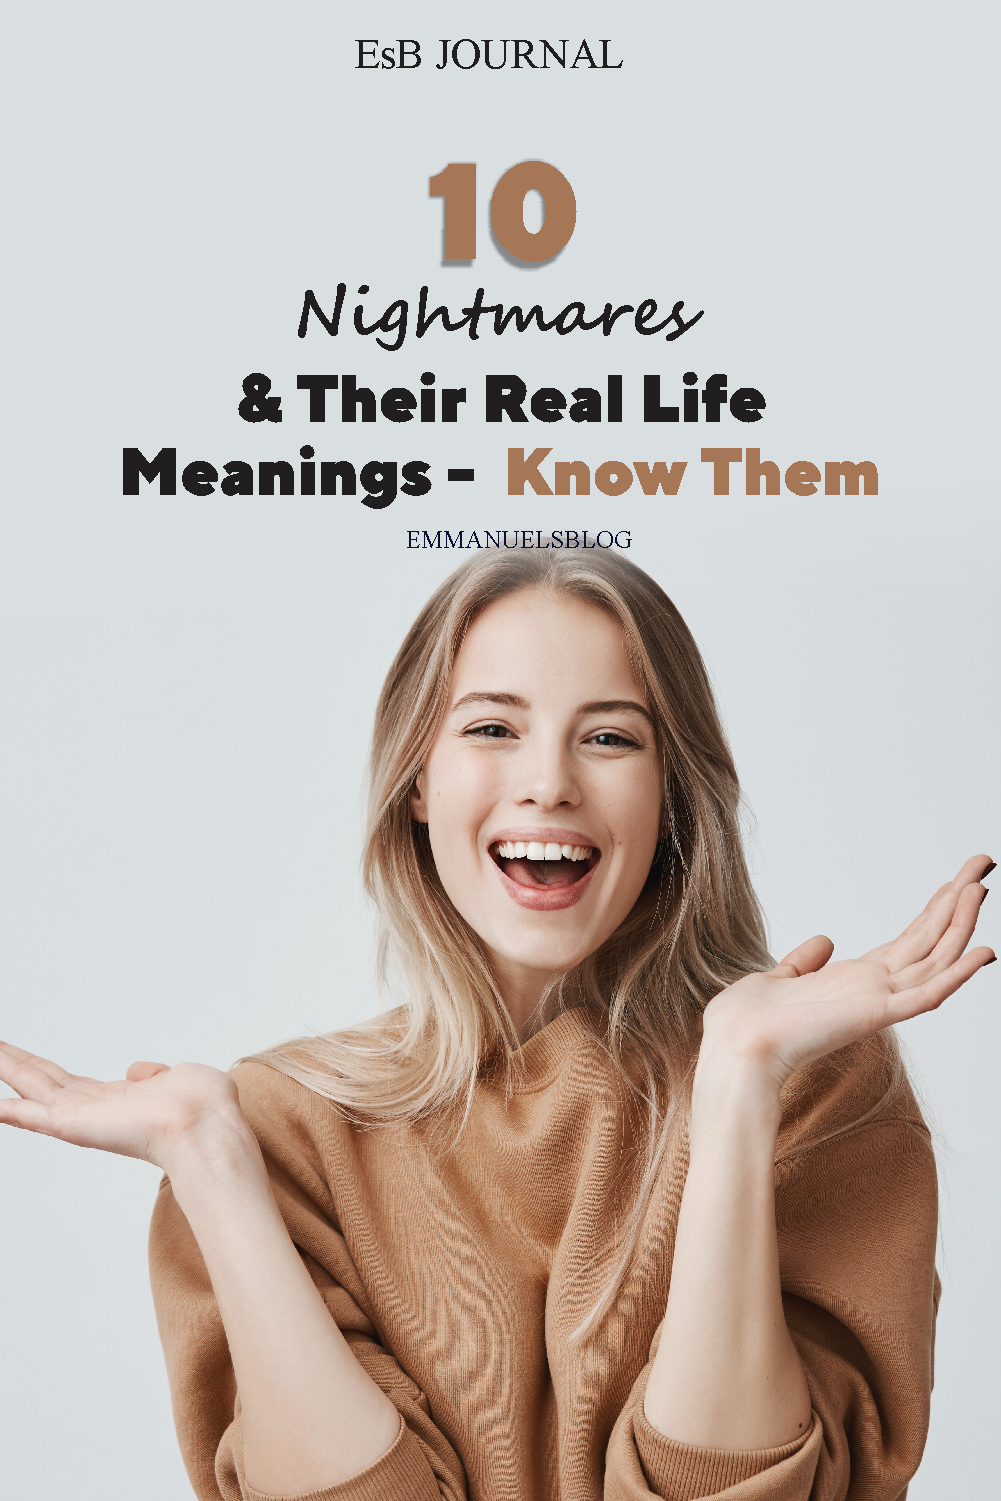 10 Nightmares And Their Real Life Meanings - Know Them